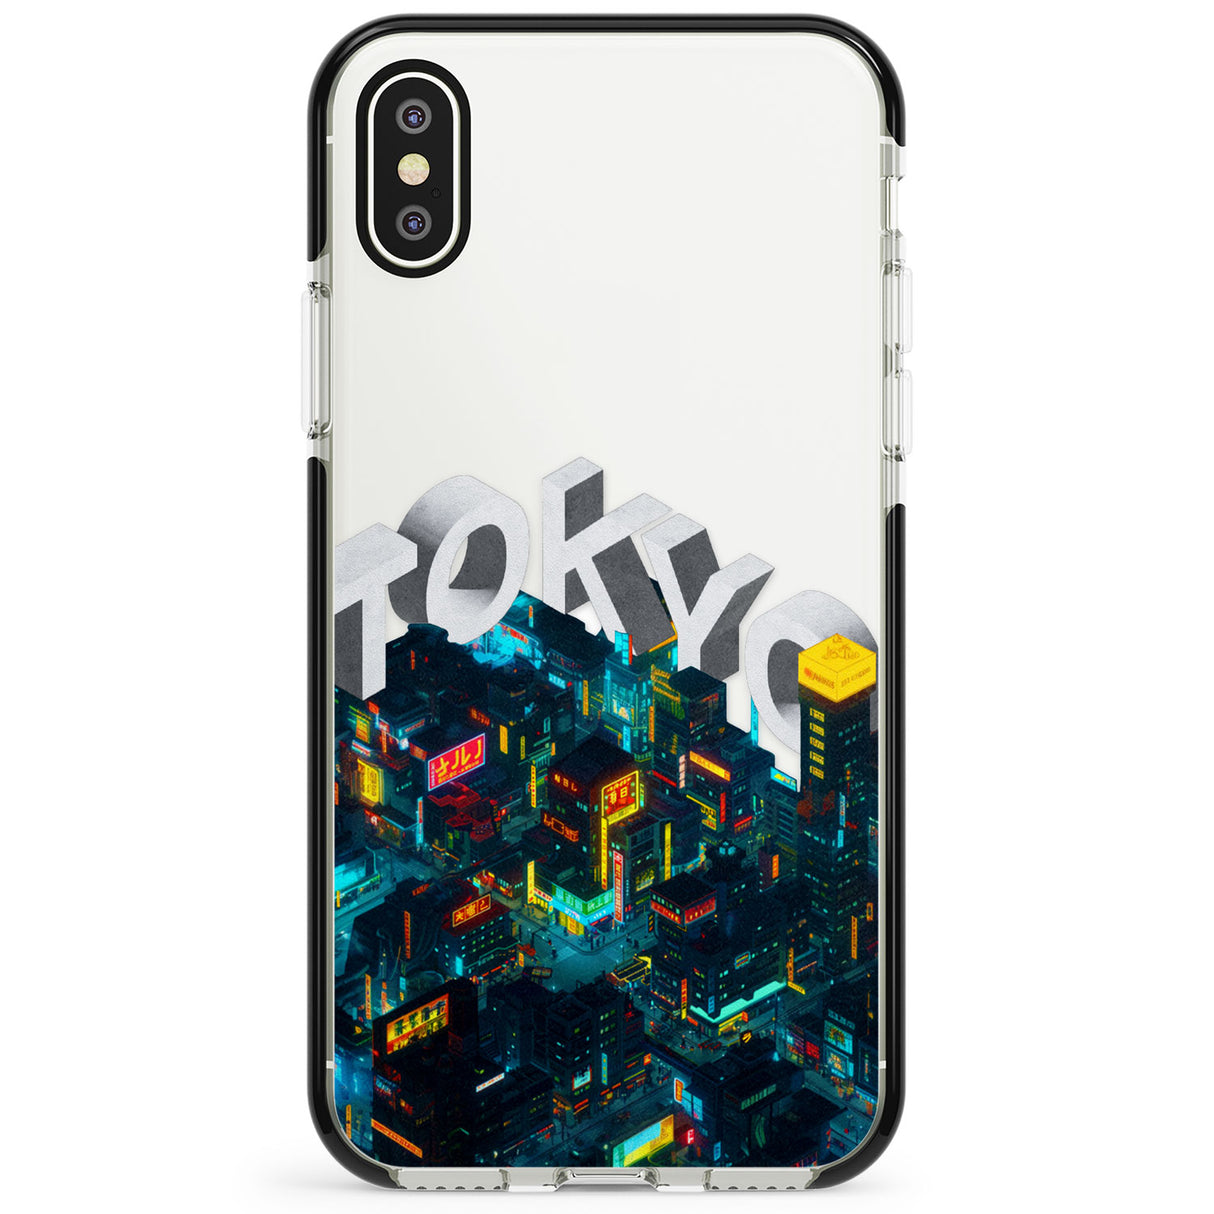 Tokyo Phone Case for iPhone X XS Max XR